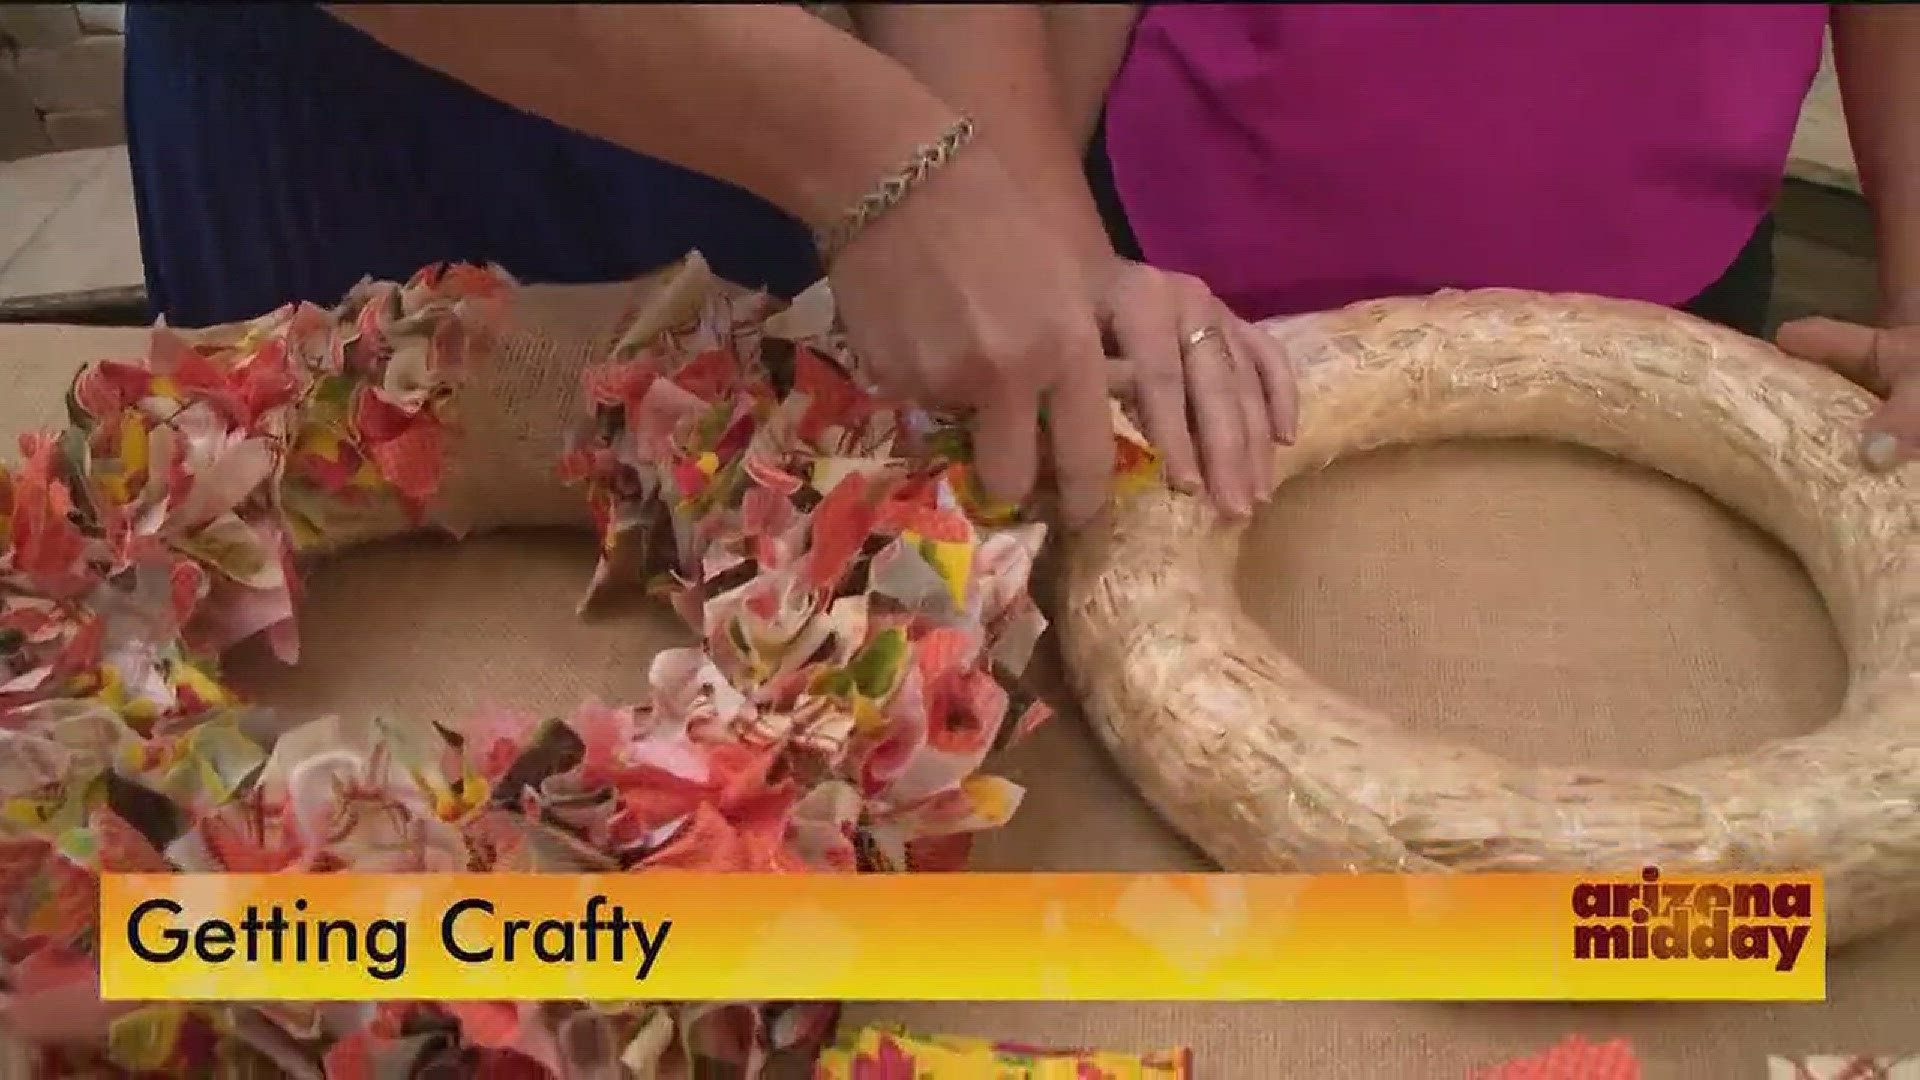 She's Crafty Boutique shows us an easy diy to get us ready for fall, plus they've got some great specials too!